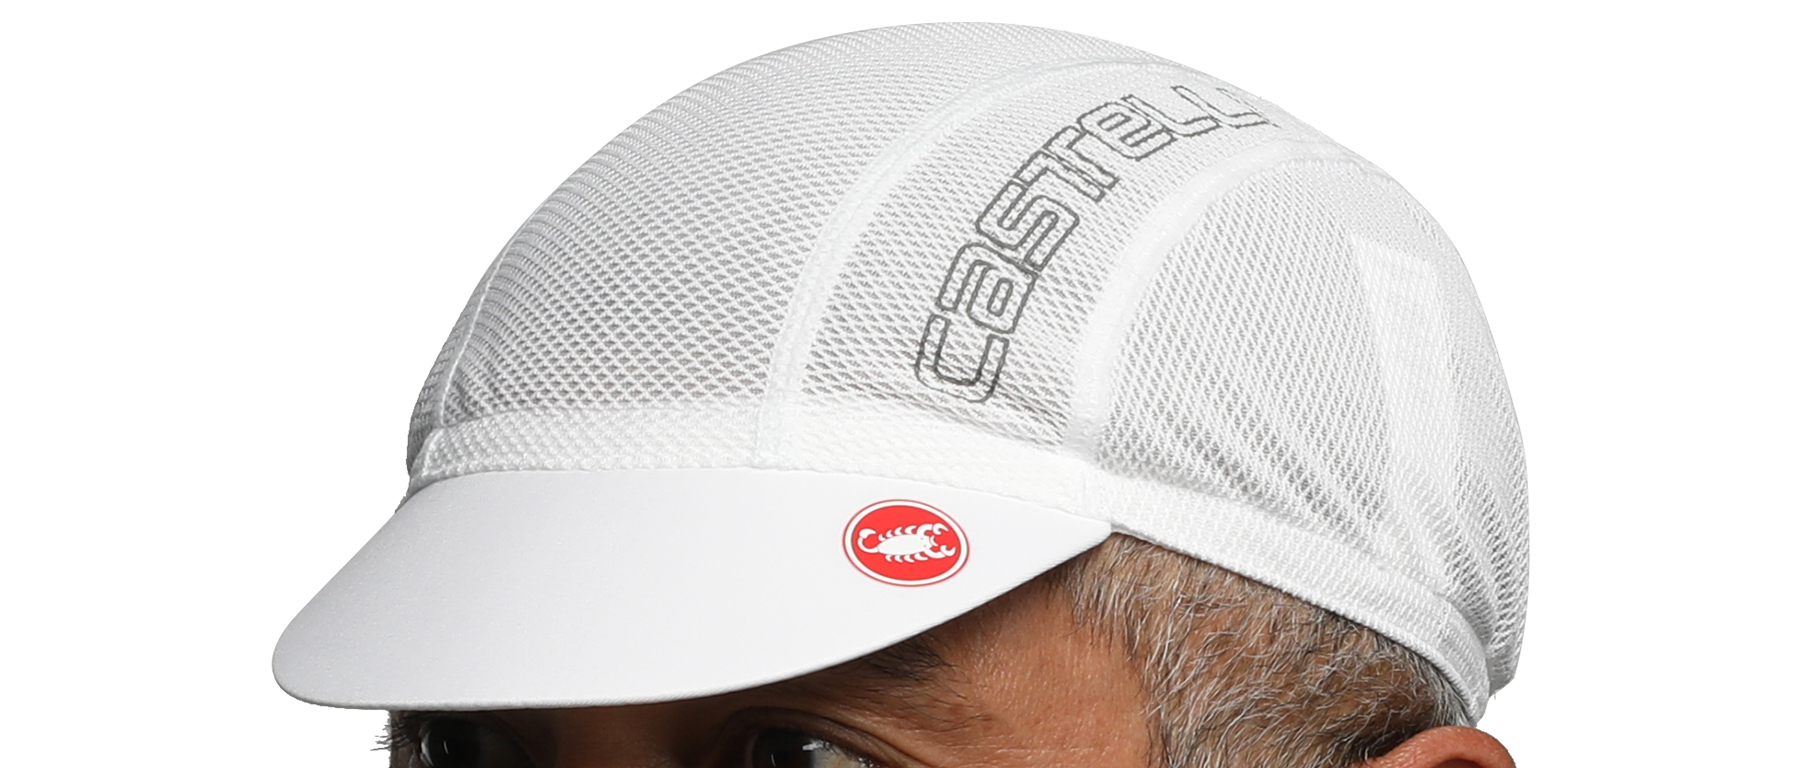 Castelli A/C 2 Cycling Cap Excel Sports | Shop Online From Boulder